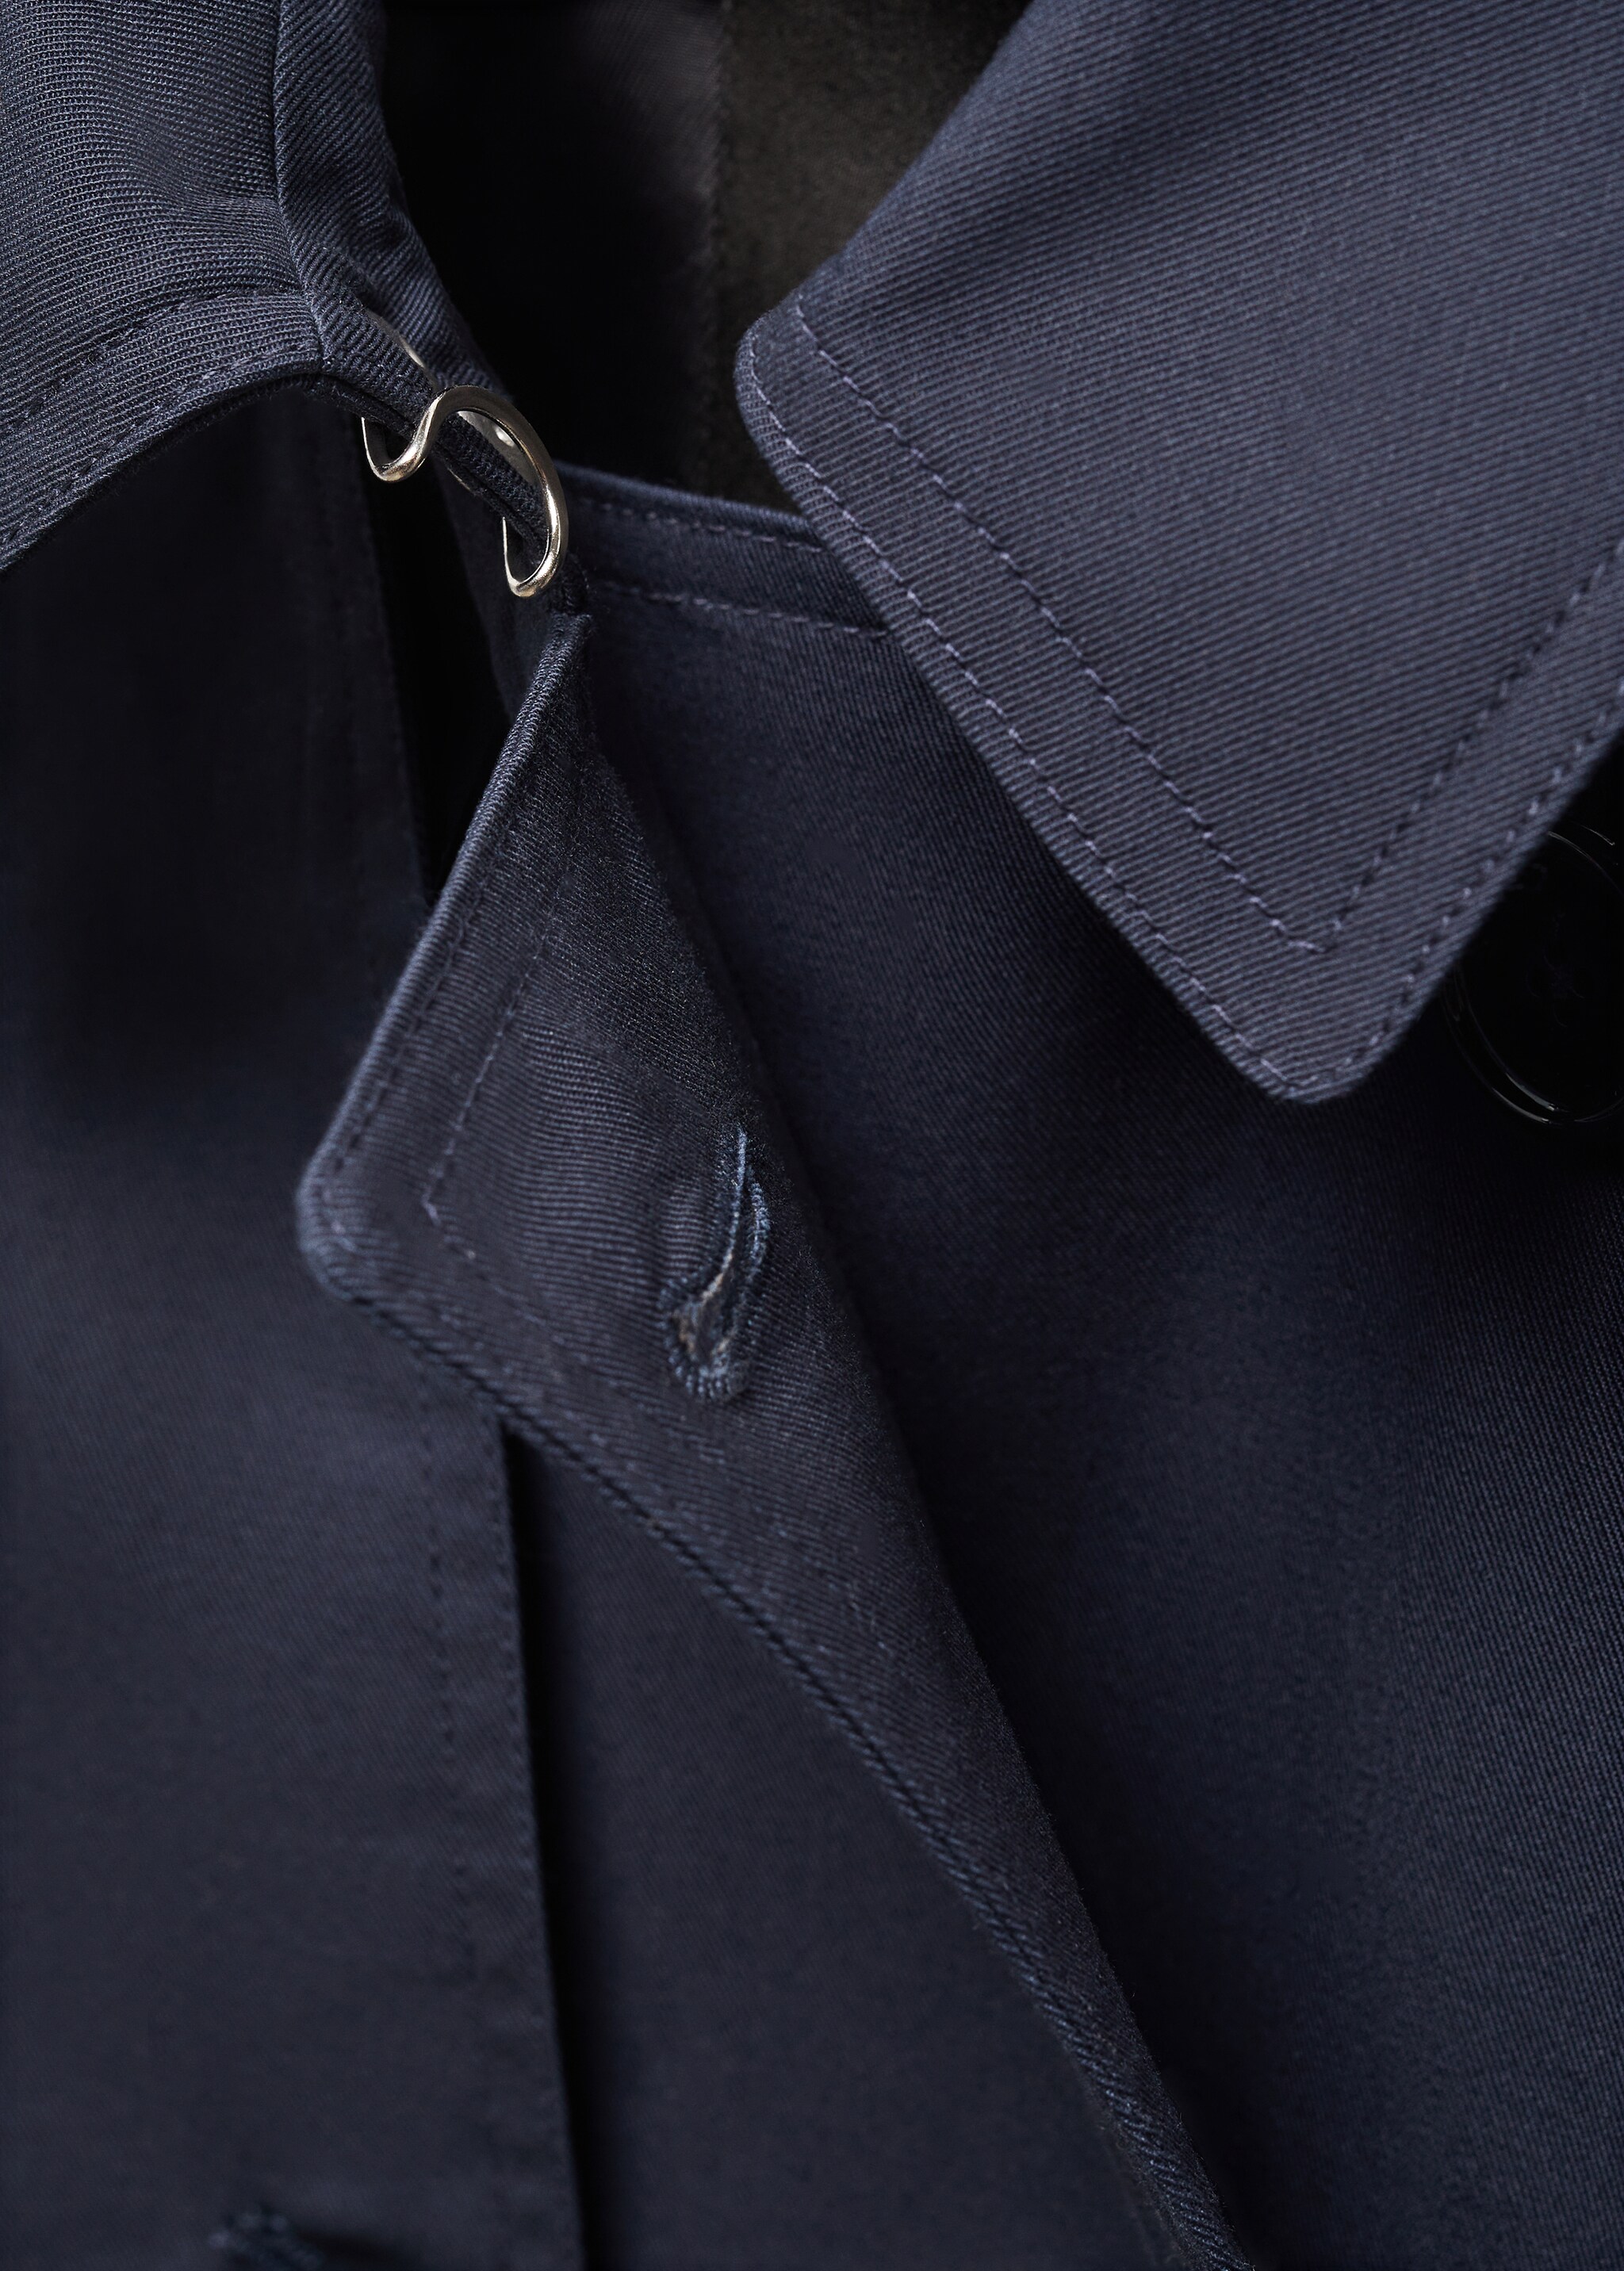 Classic trench coat with belt - Details of the article 8